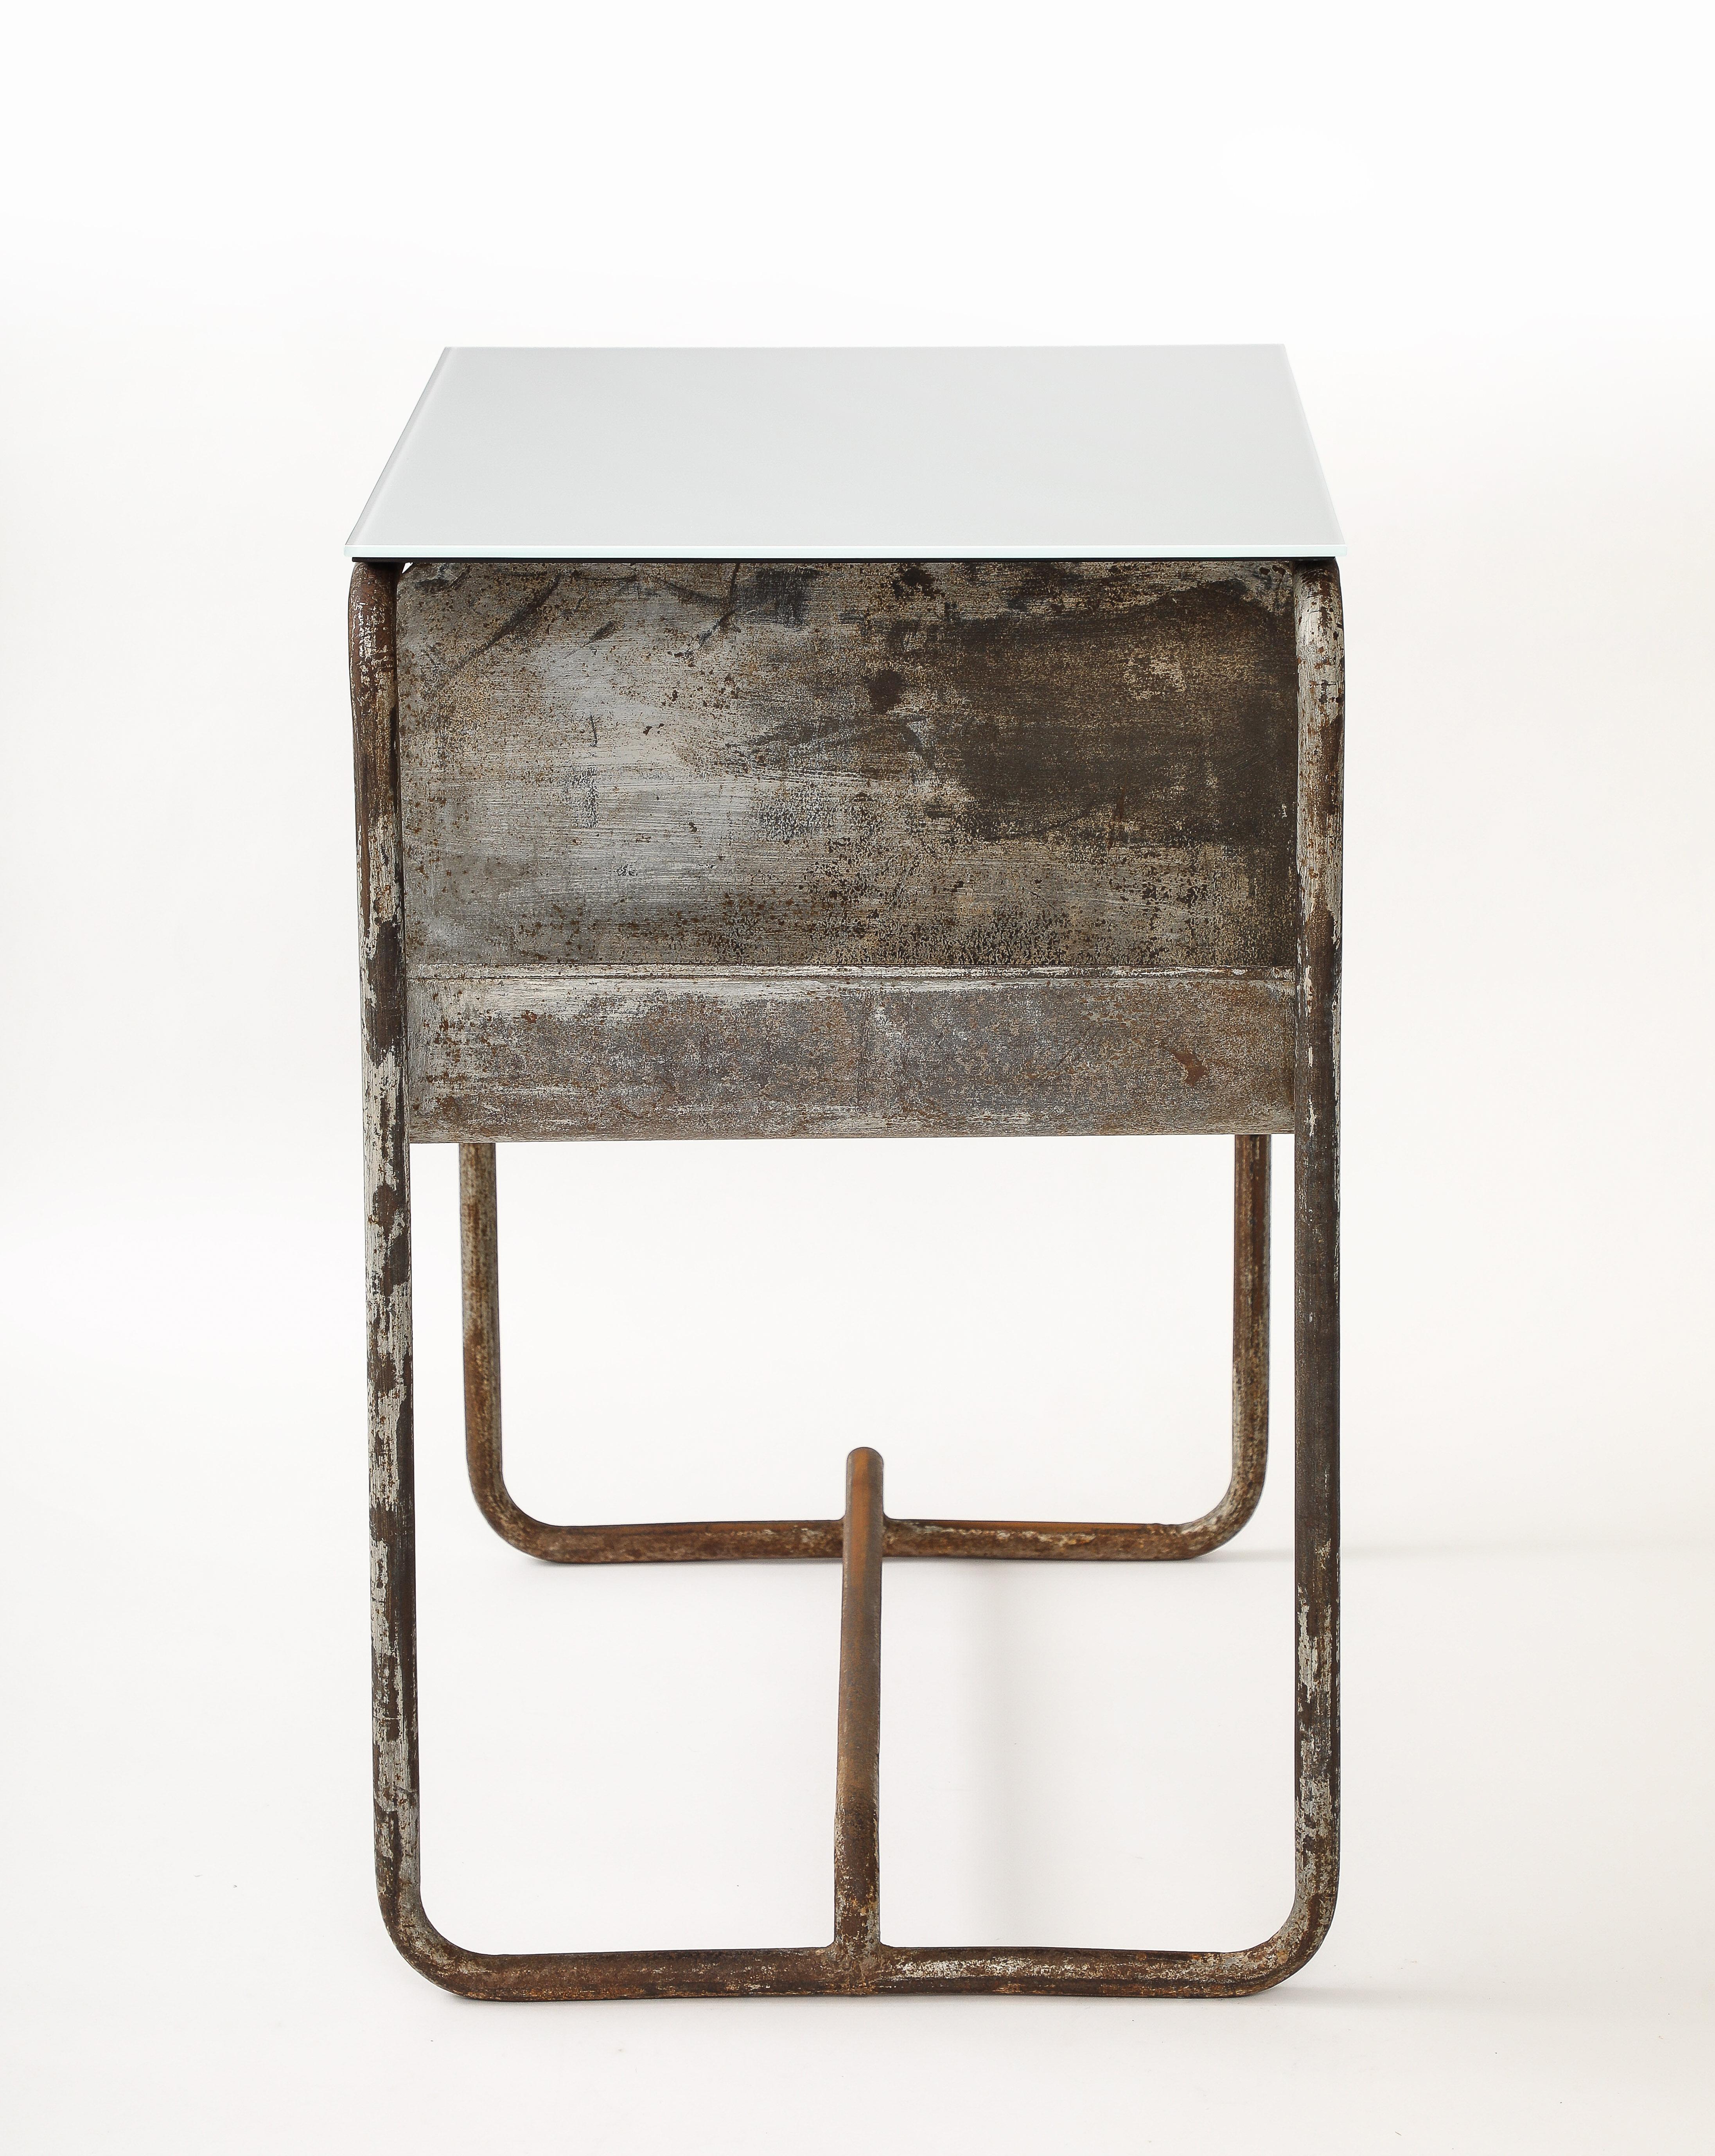 Early Modernist Desk Side Table, Nickel Patina, Opaline Top, France, c. 1920 For Sale 7